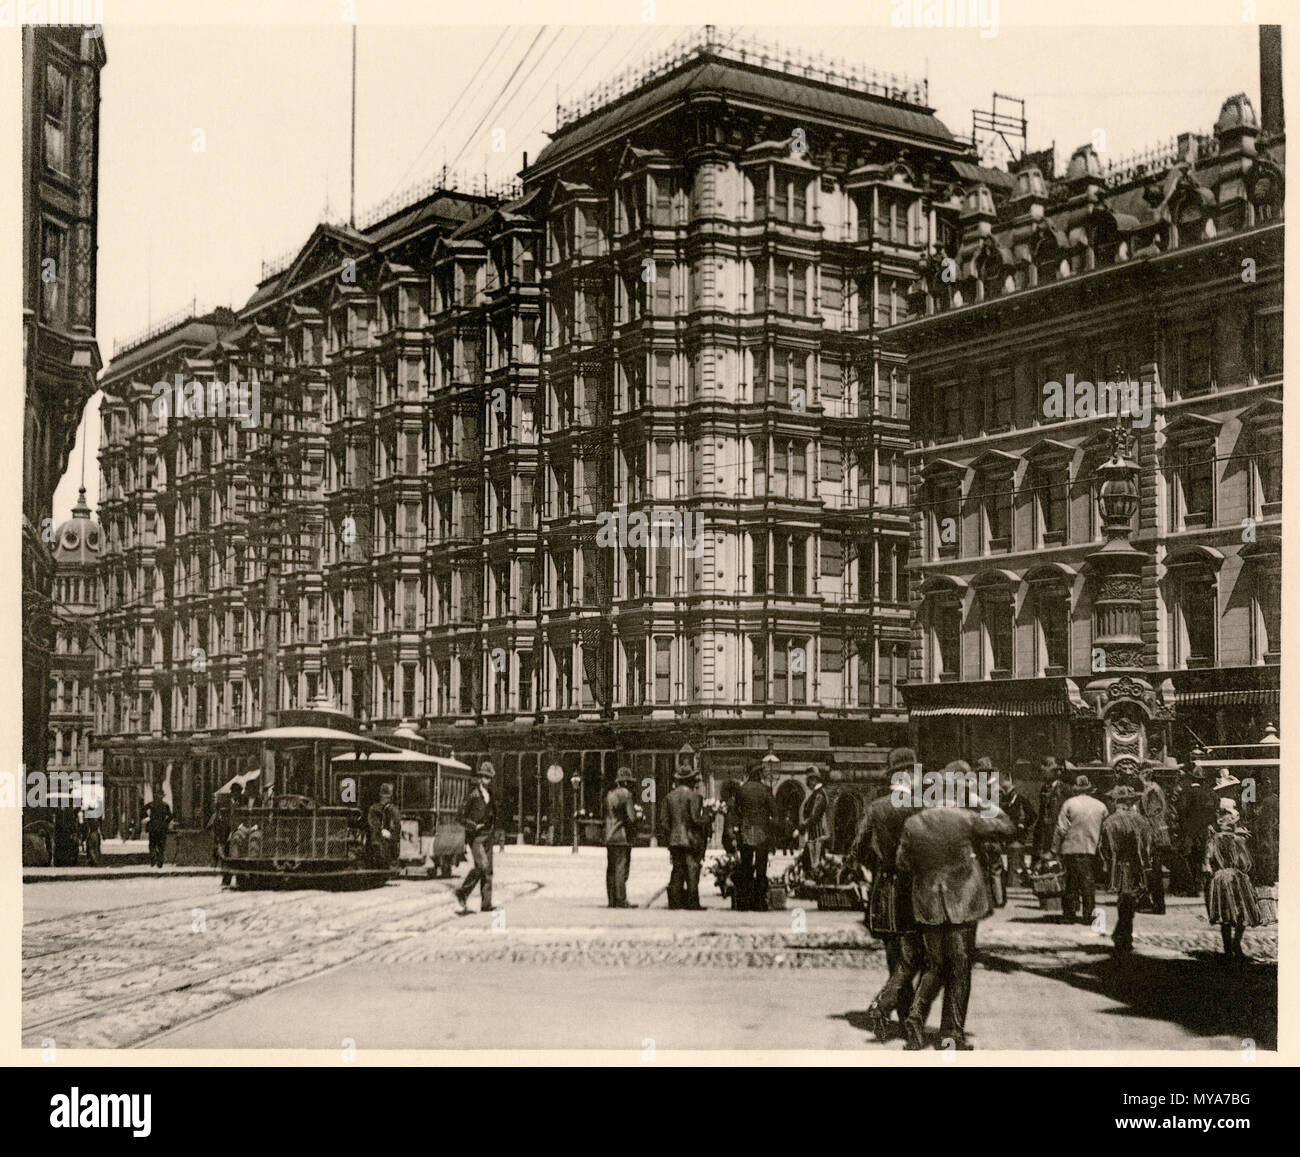 Palace Hotel in downtown San Francisco, 1890s. Albertype (photograph) Stock Photo